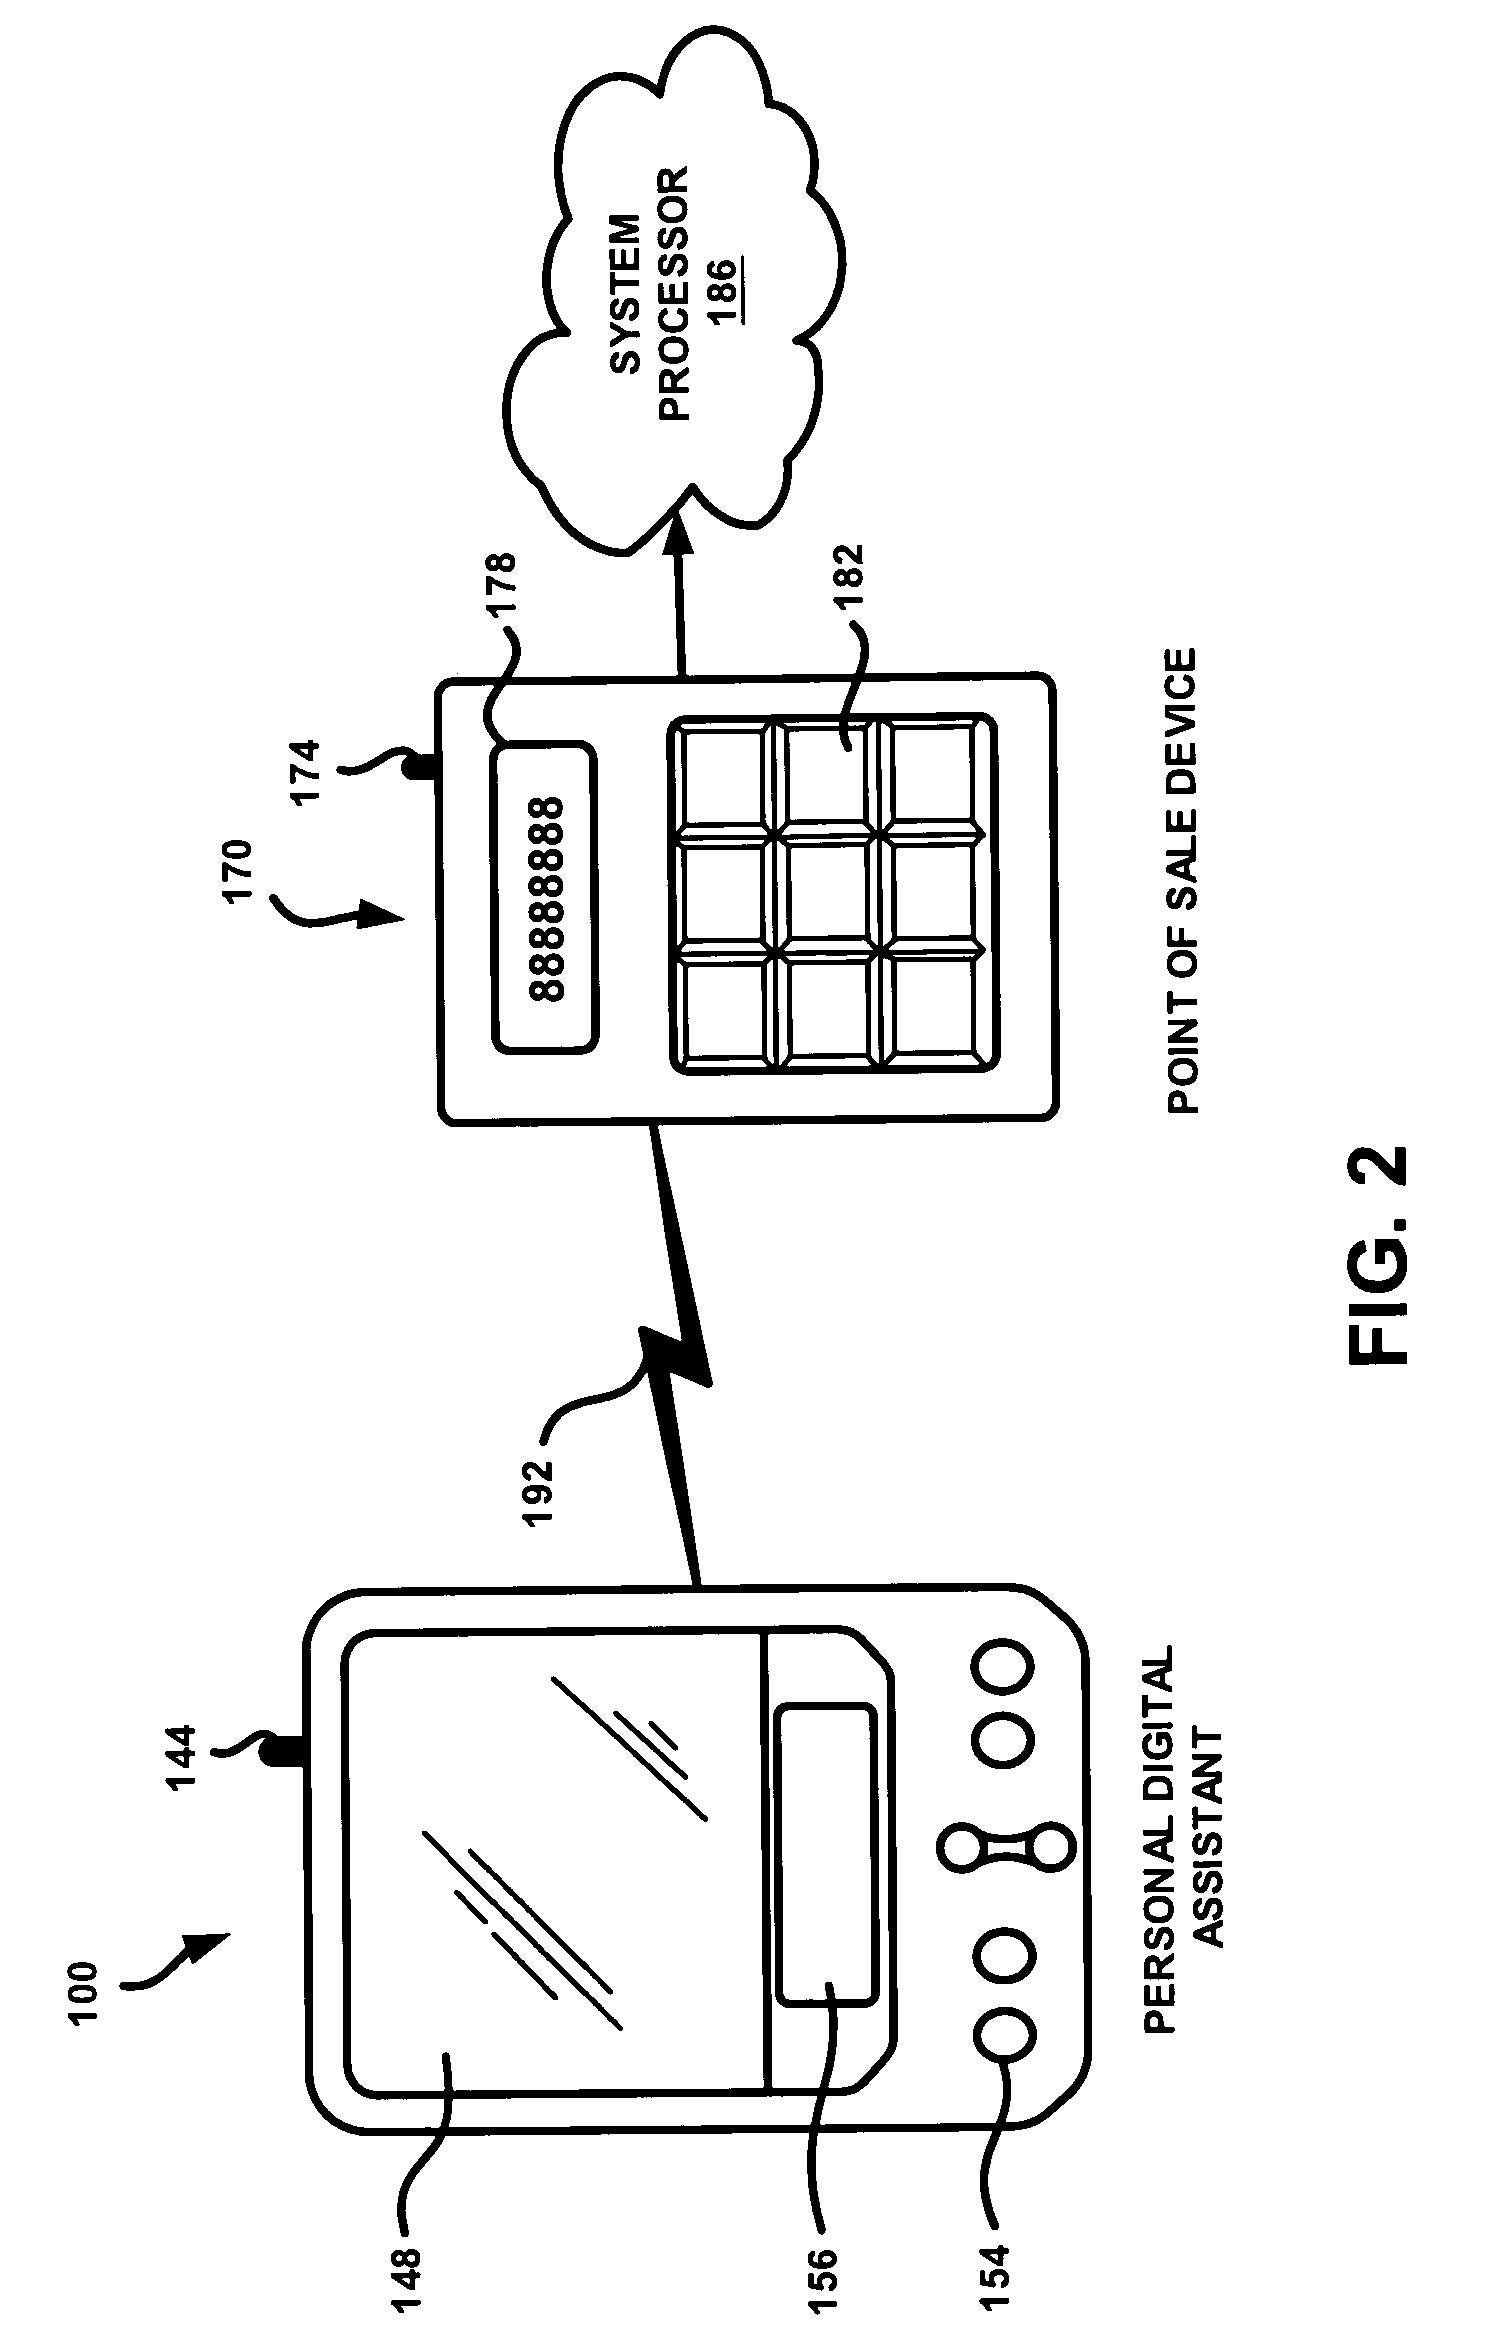 System and method for monitoring a security state of an electronic device